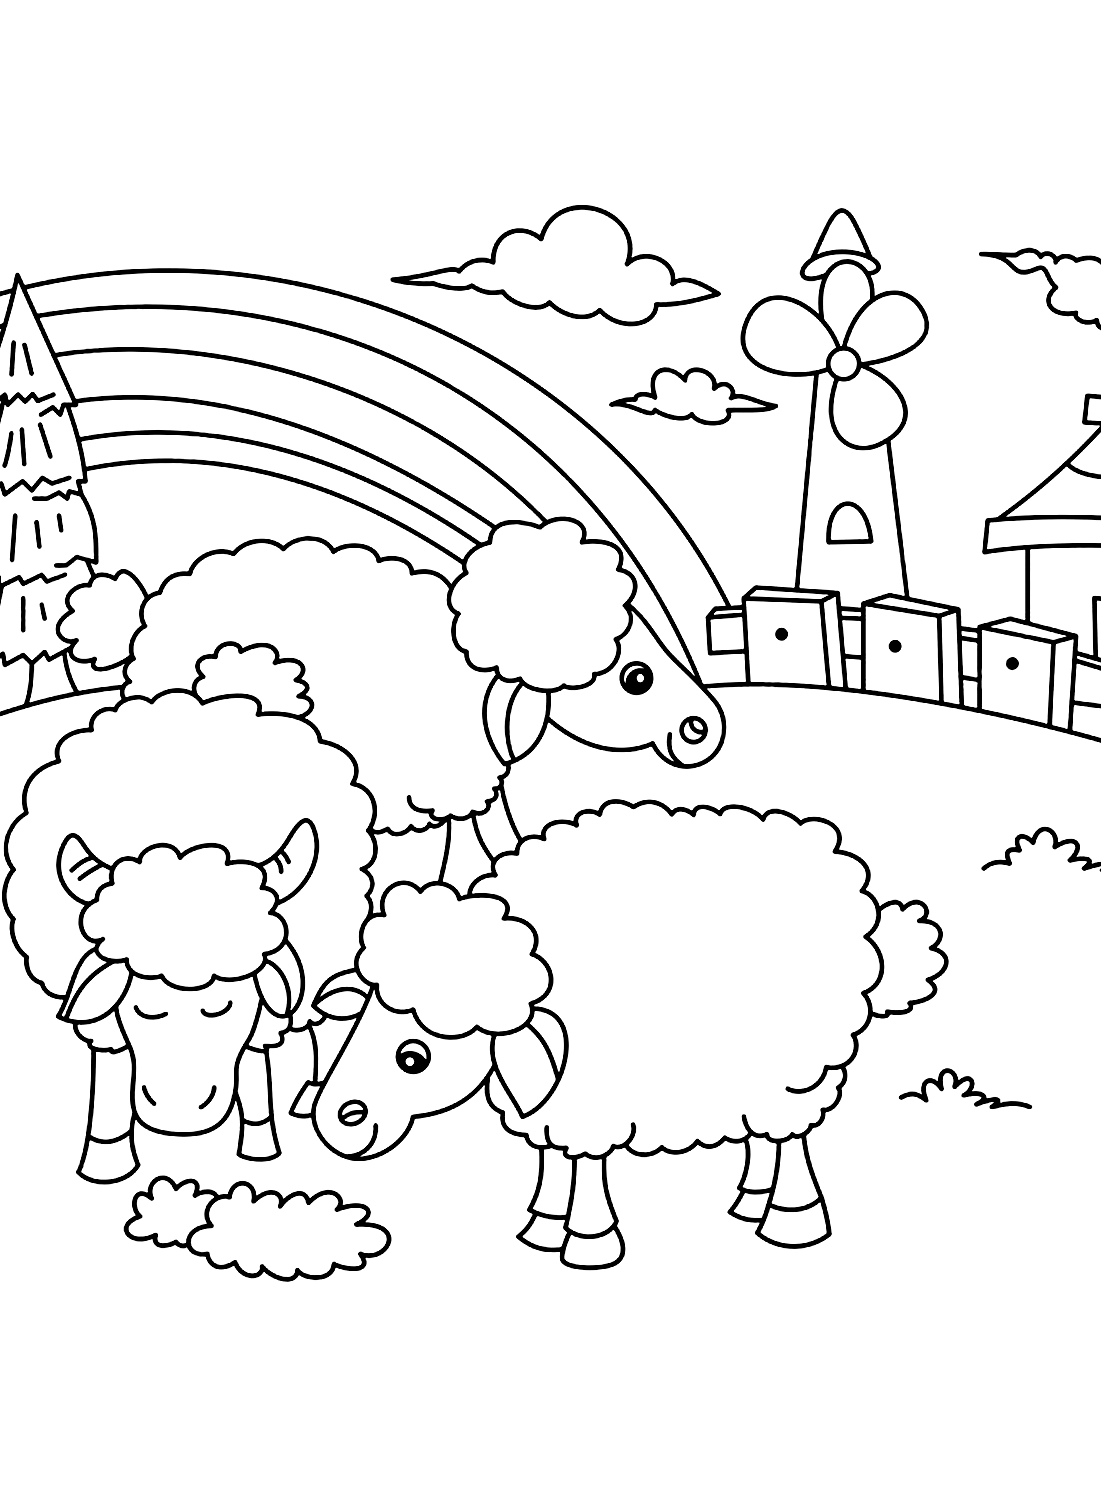 Coloring Page of Sheep’s Family